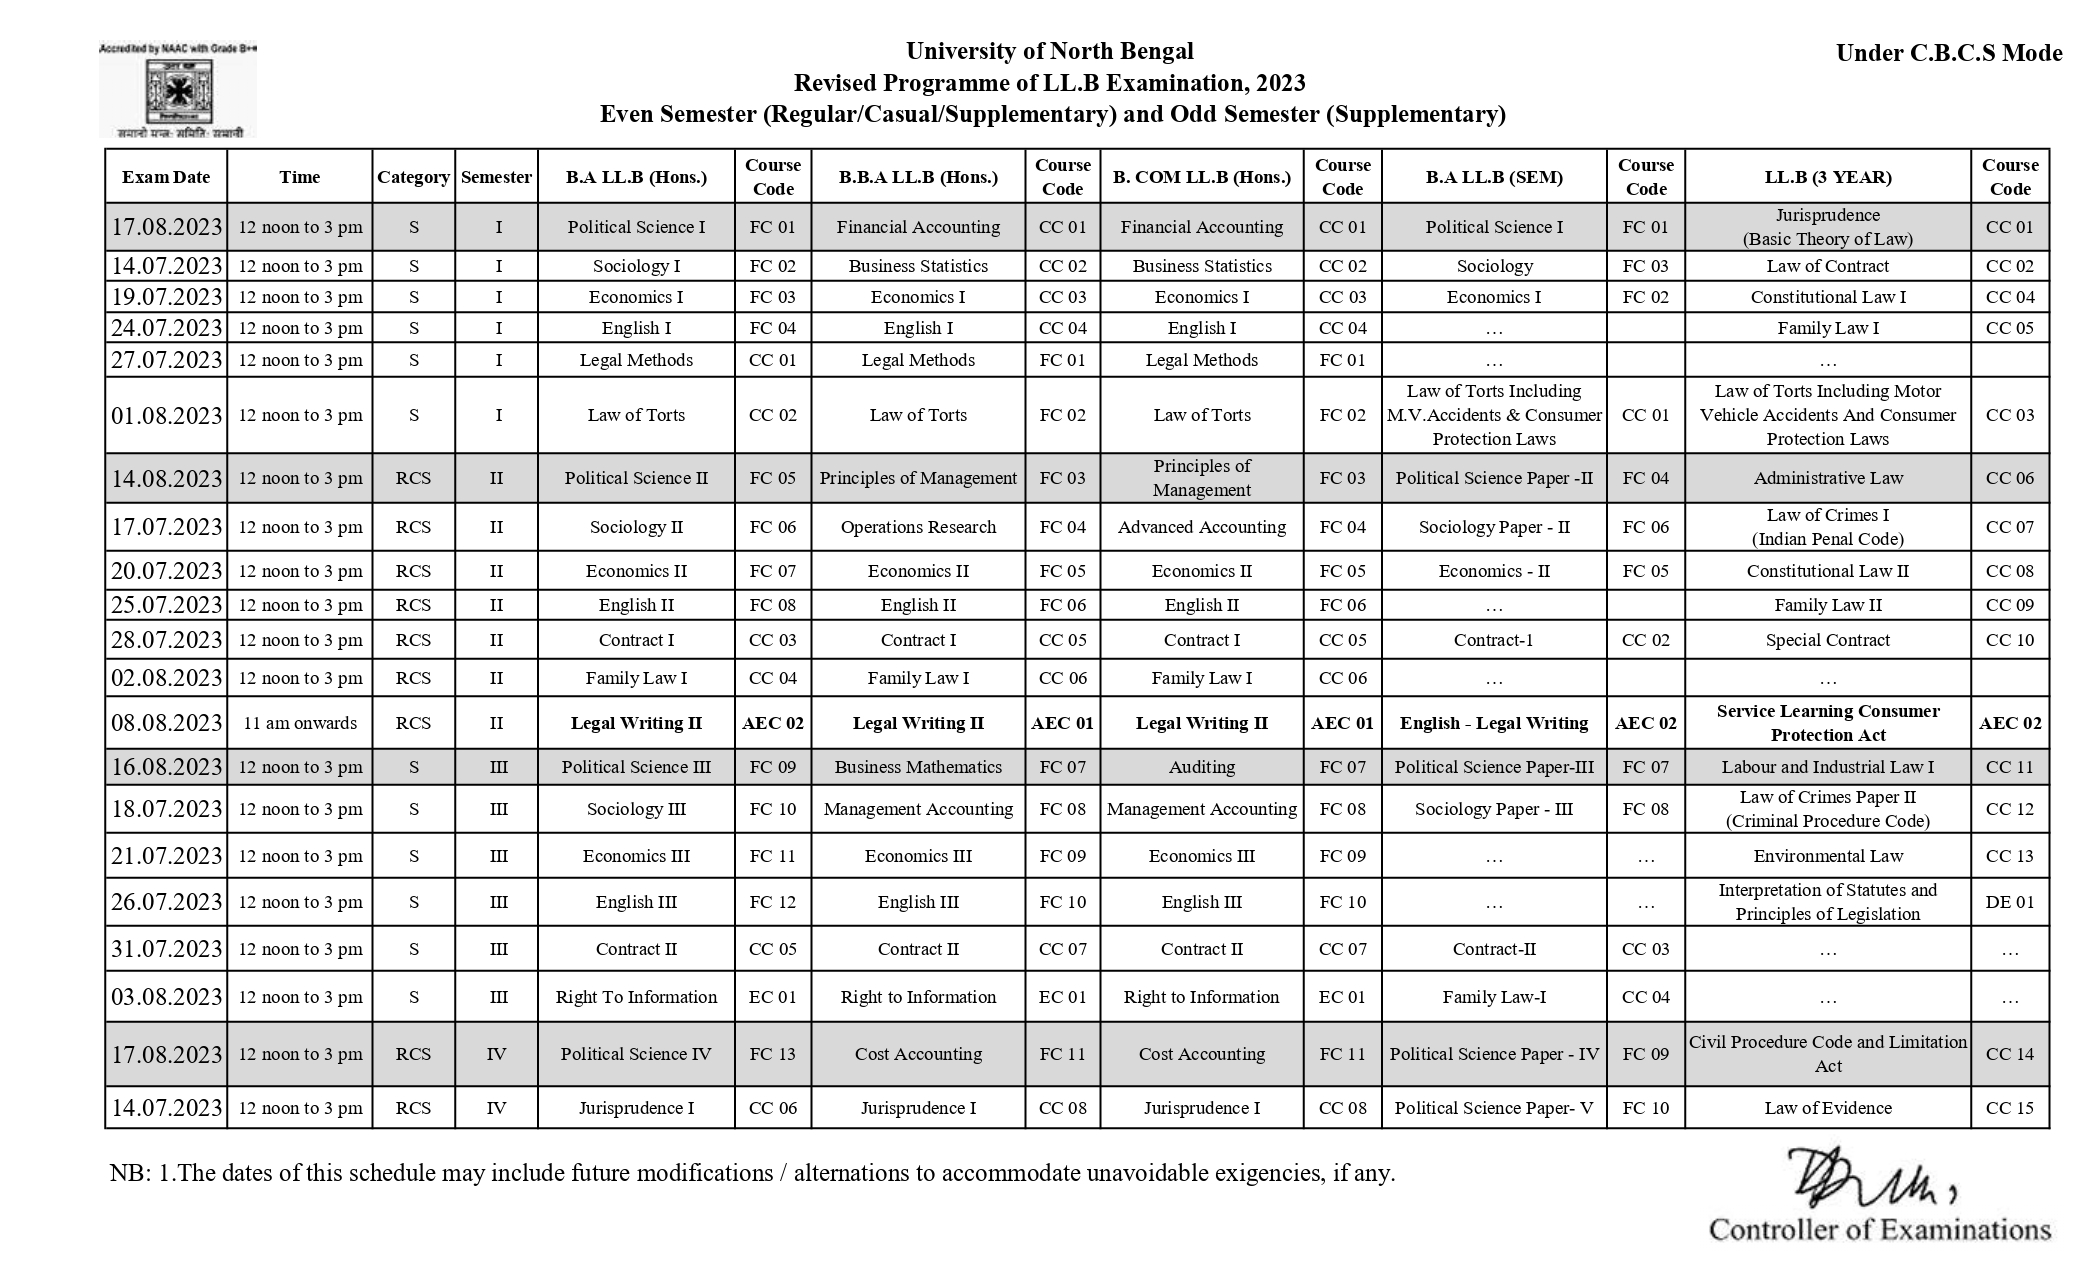 Revised Examination Schedule July 2023 (CBCS) Page 1